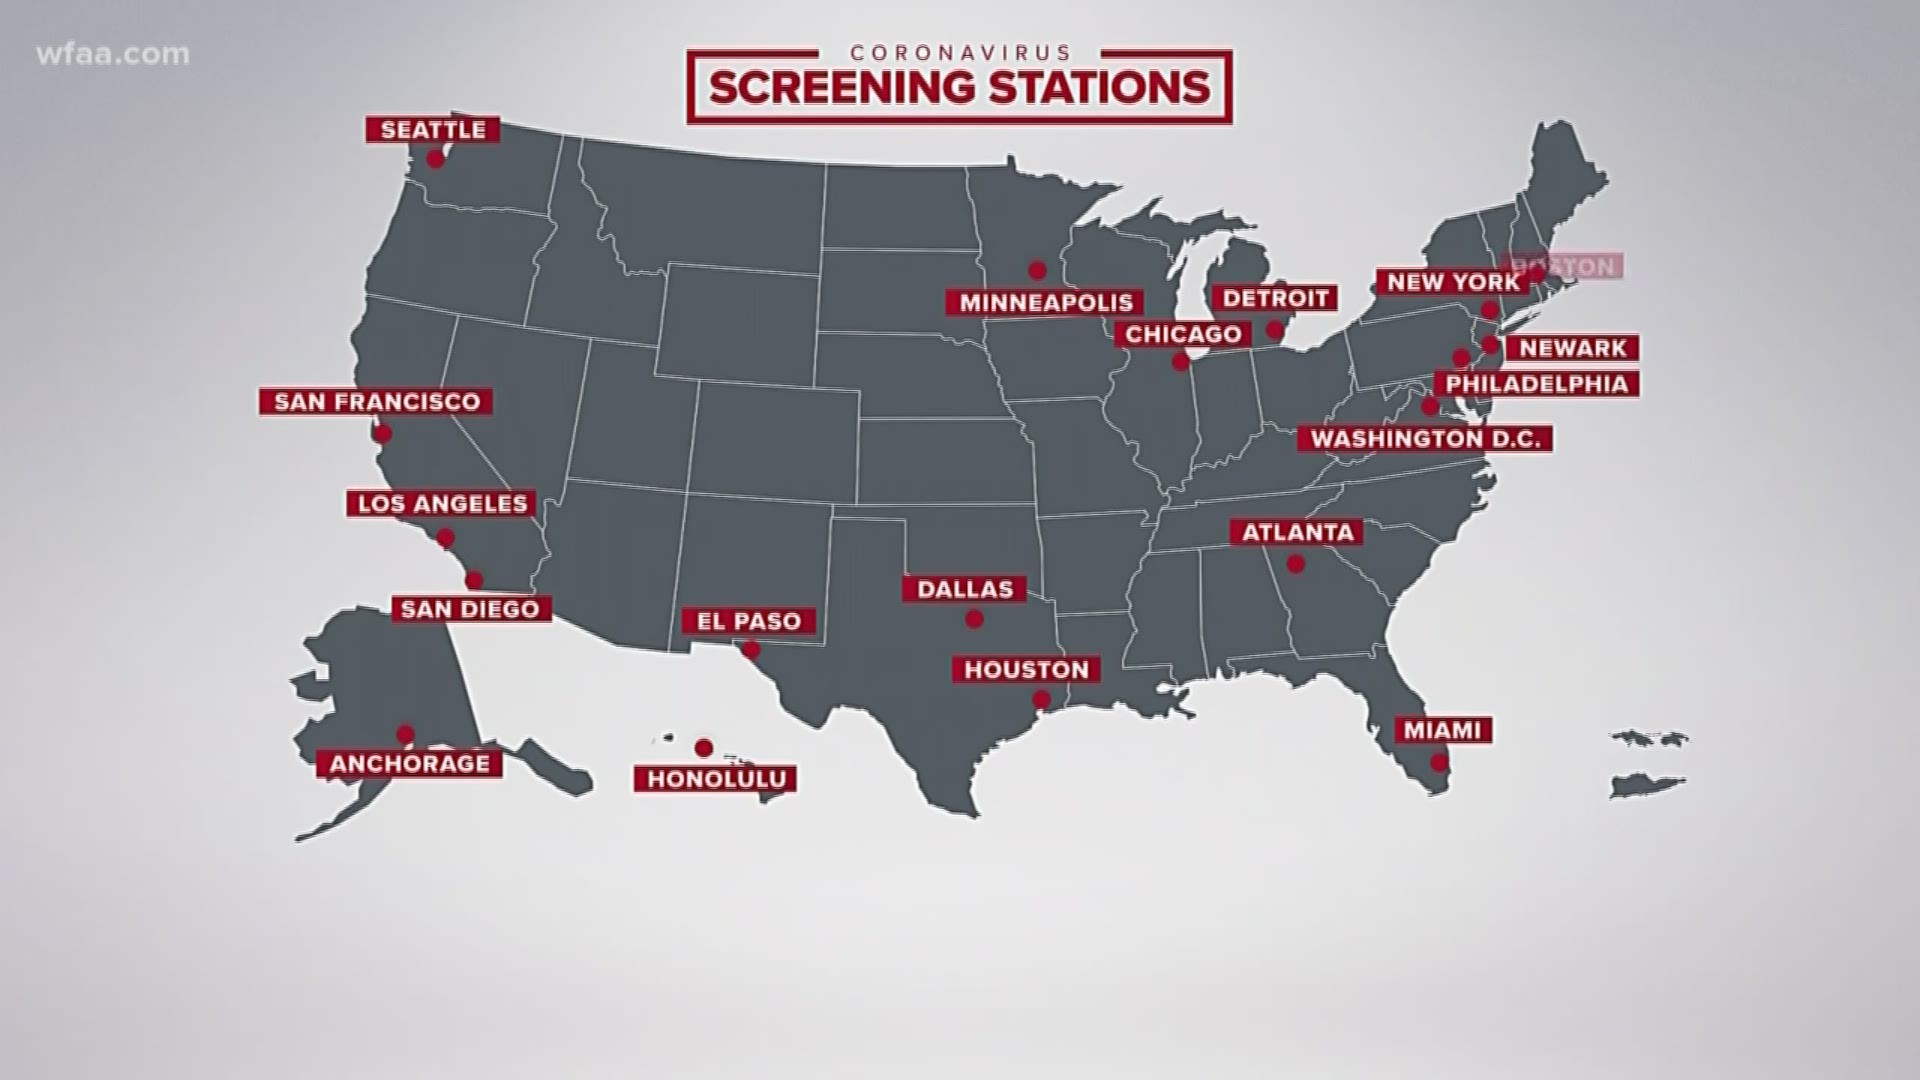 The airport is one of 20 across the U.S. that has been chosen by the Centers for Disease Control and Prevention to screen flights from China.